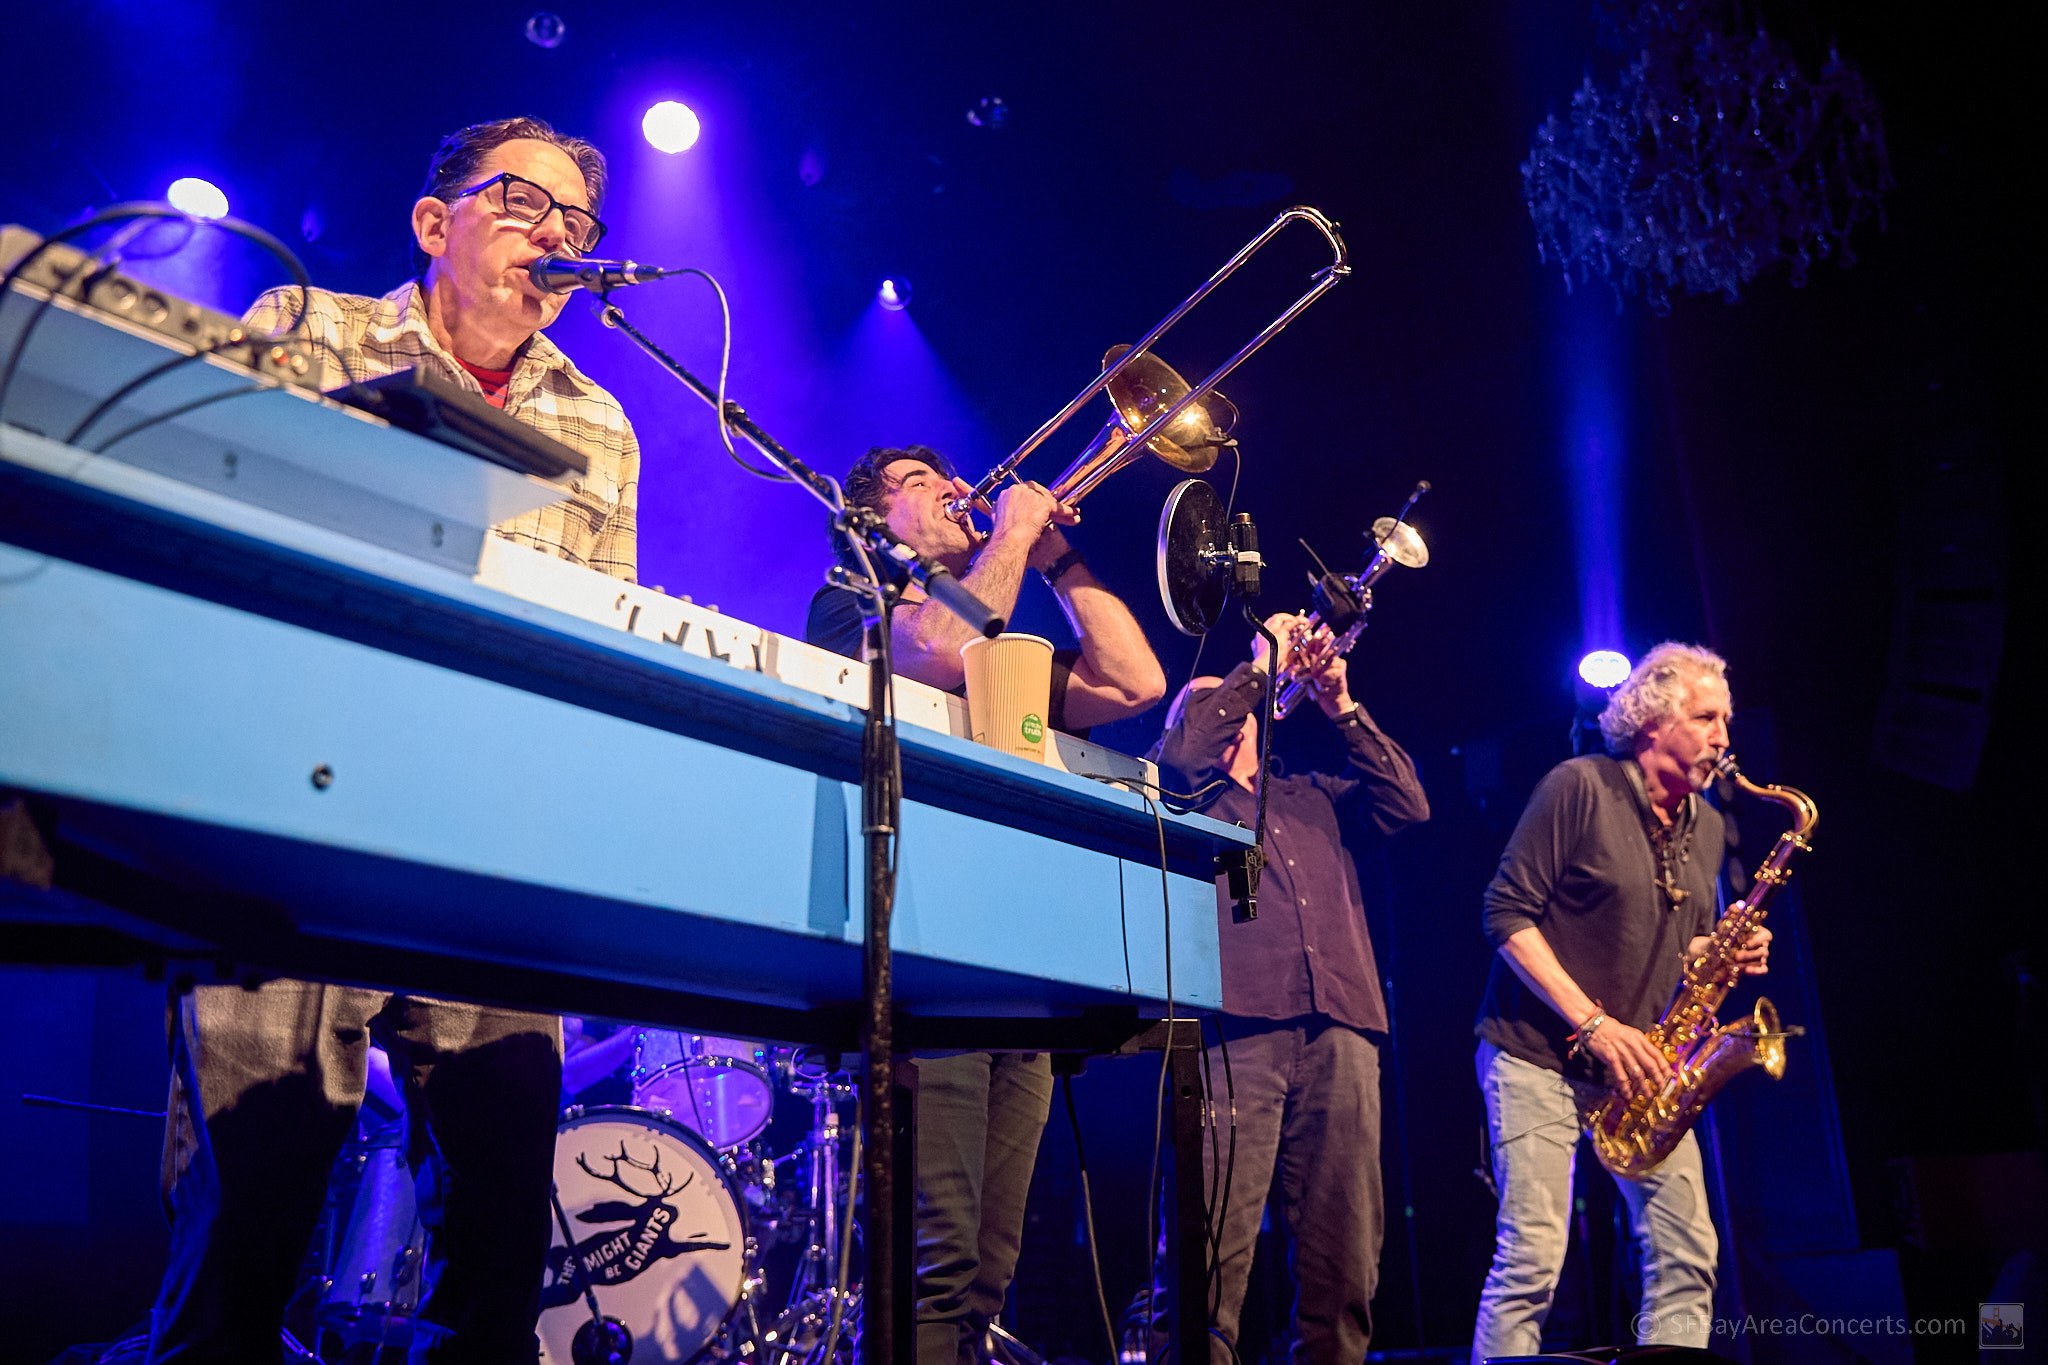 John Linnell & TMBG's brass section @ the Fillmore (Photo: Kevin Keating)